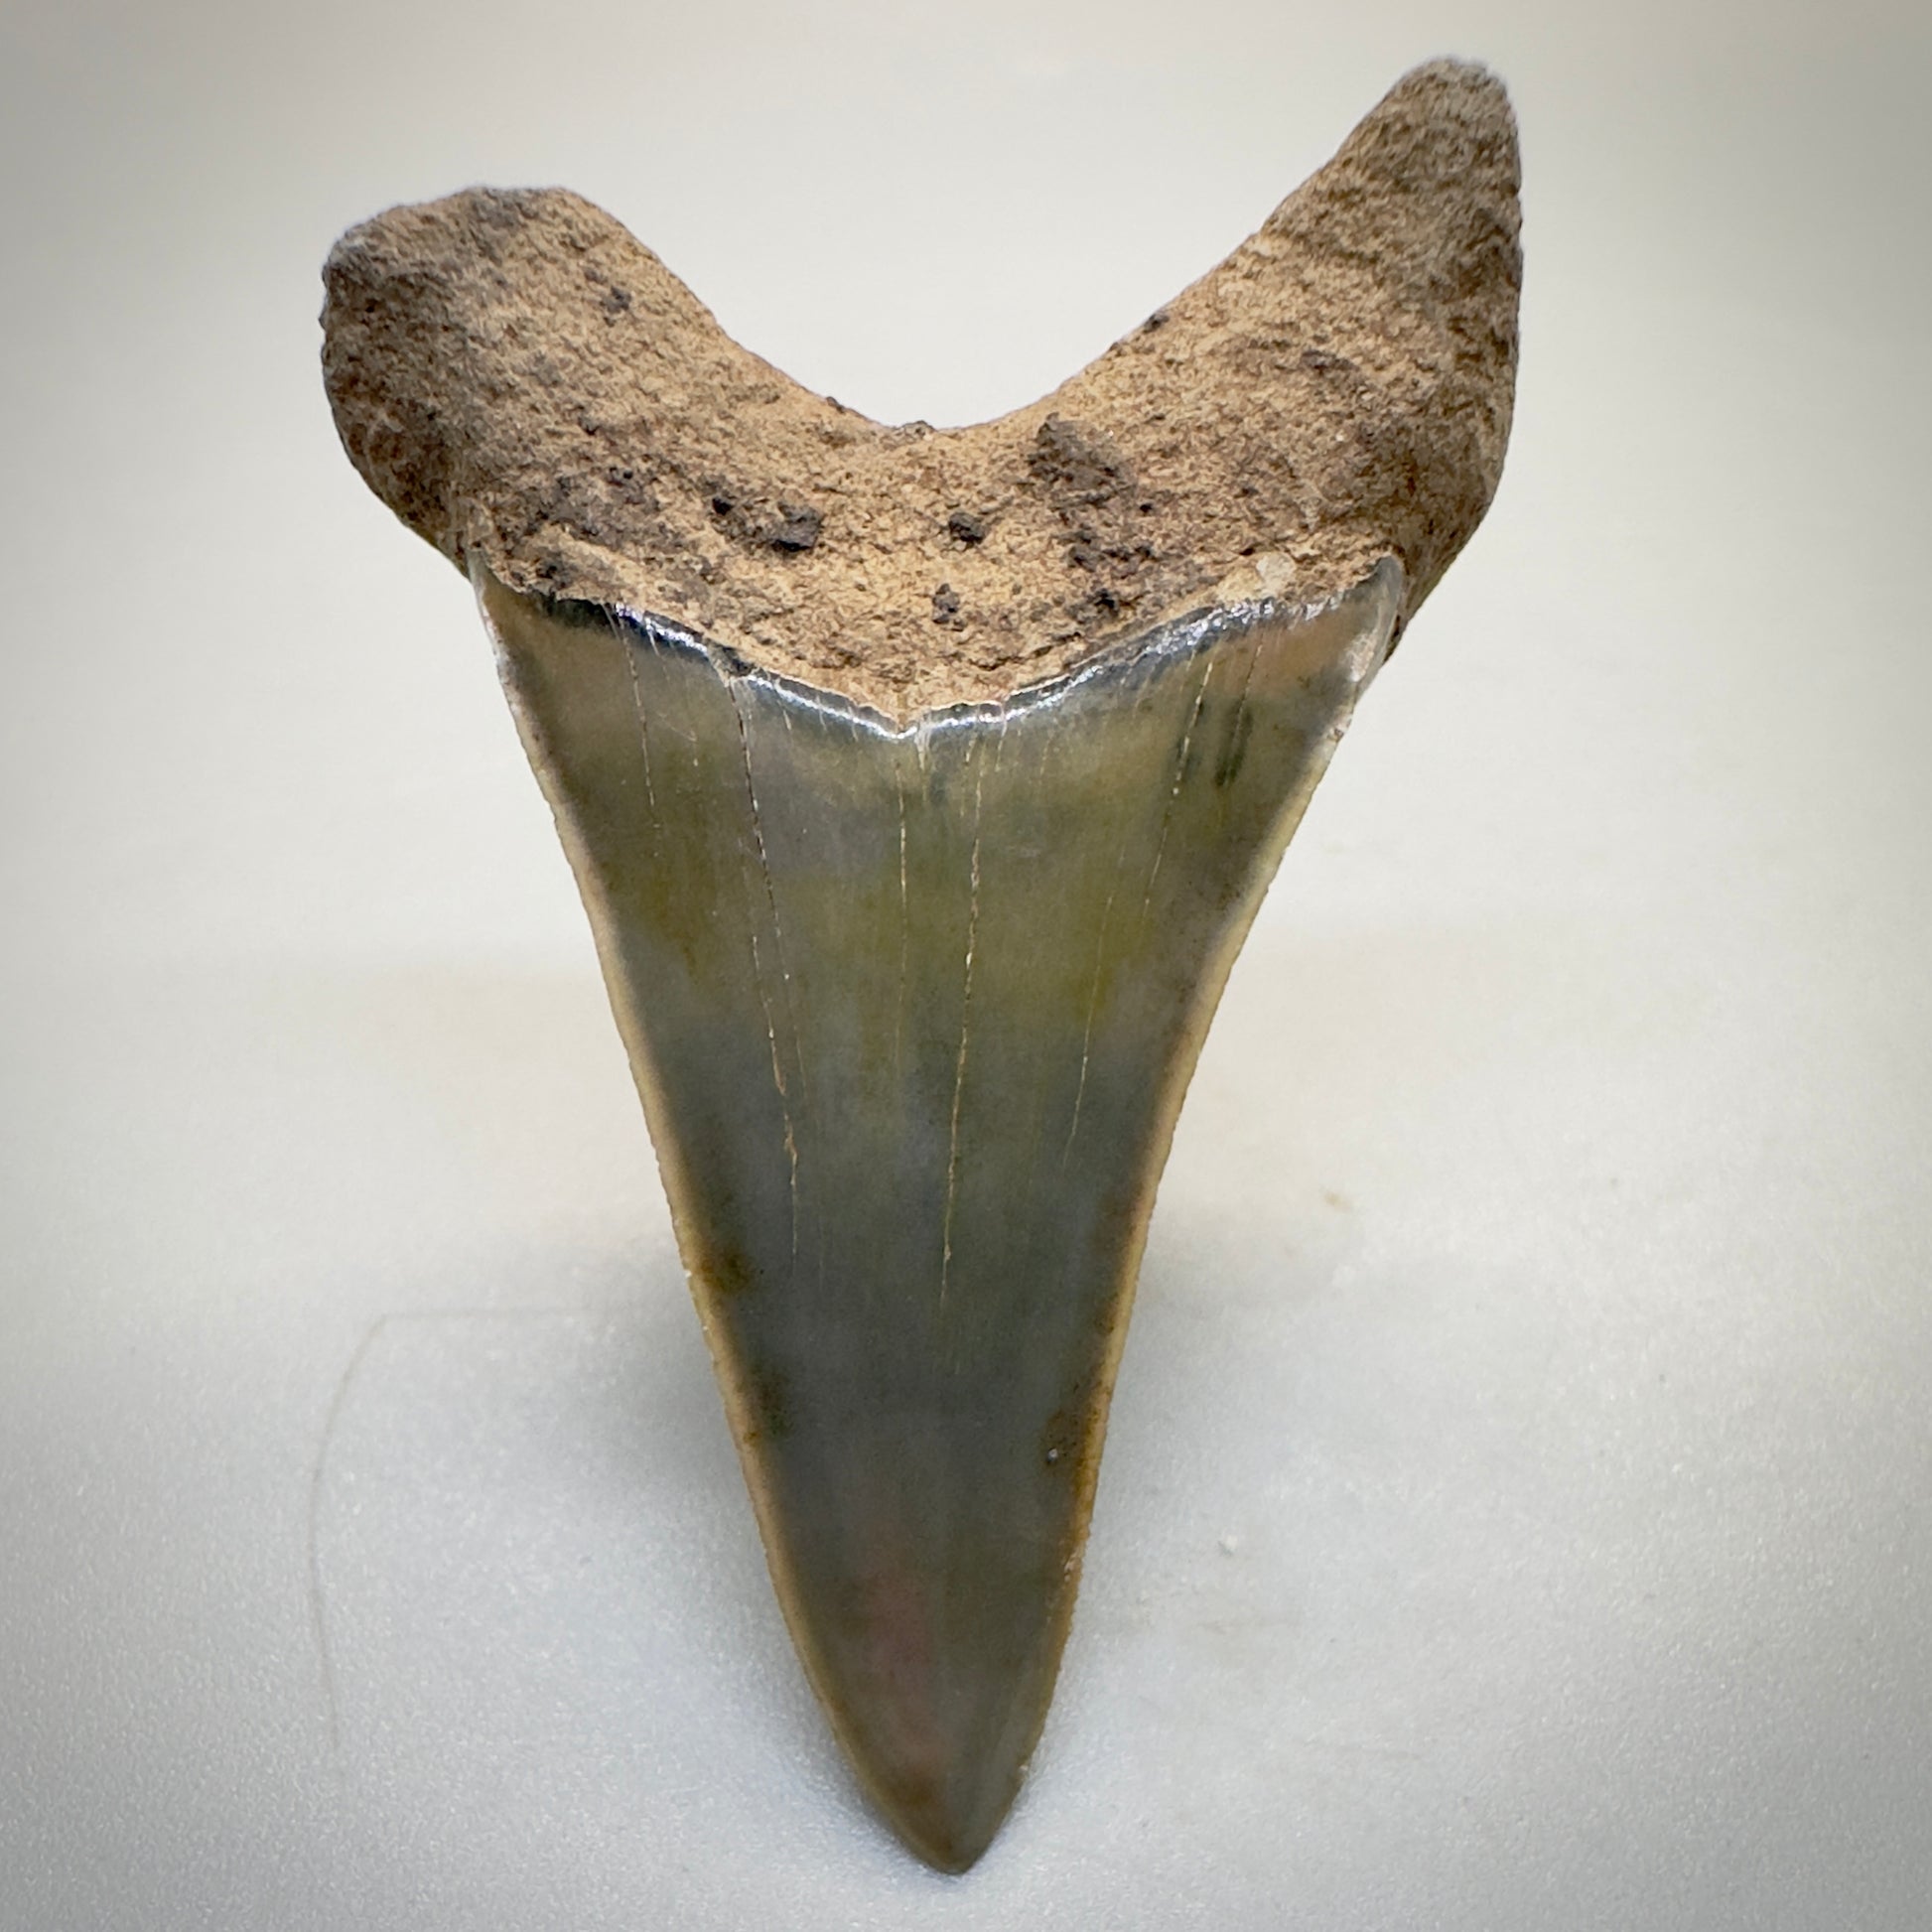 1.96 inches colorful Extinct Mako - isurus hastalis shark tooth from southeast, USA M510 back down